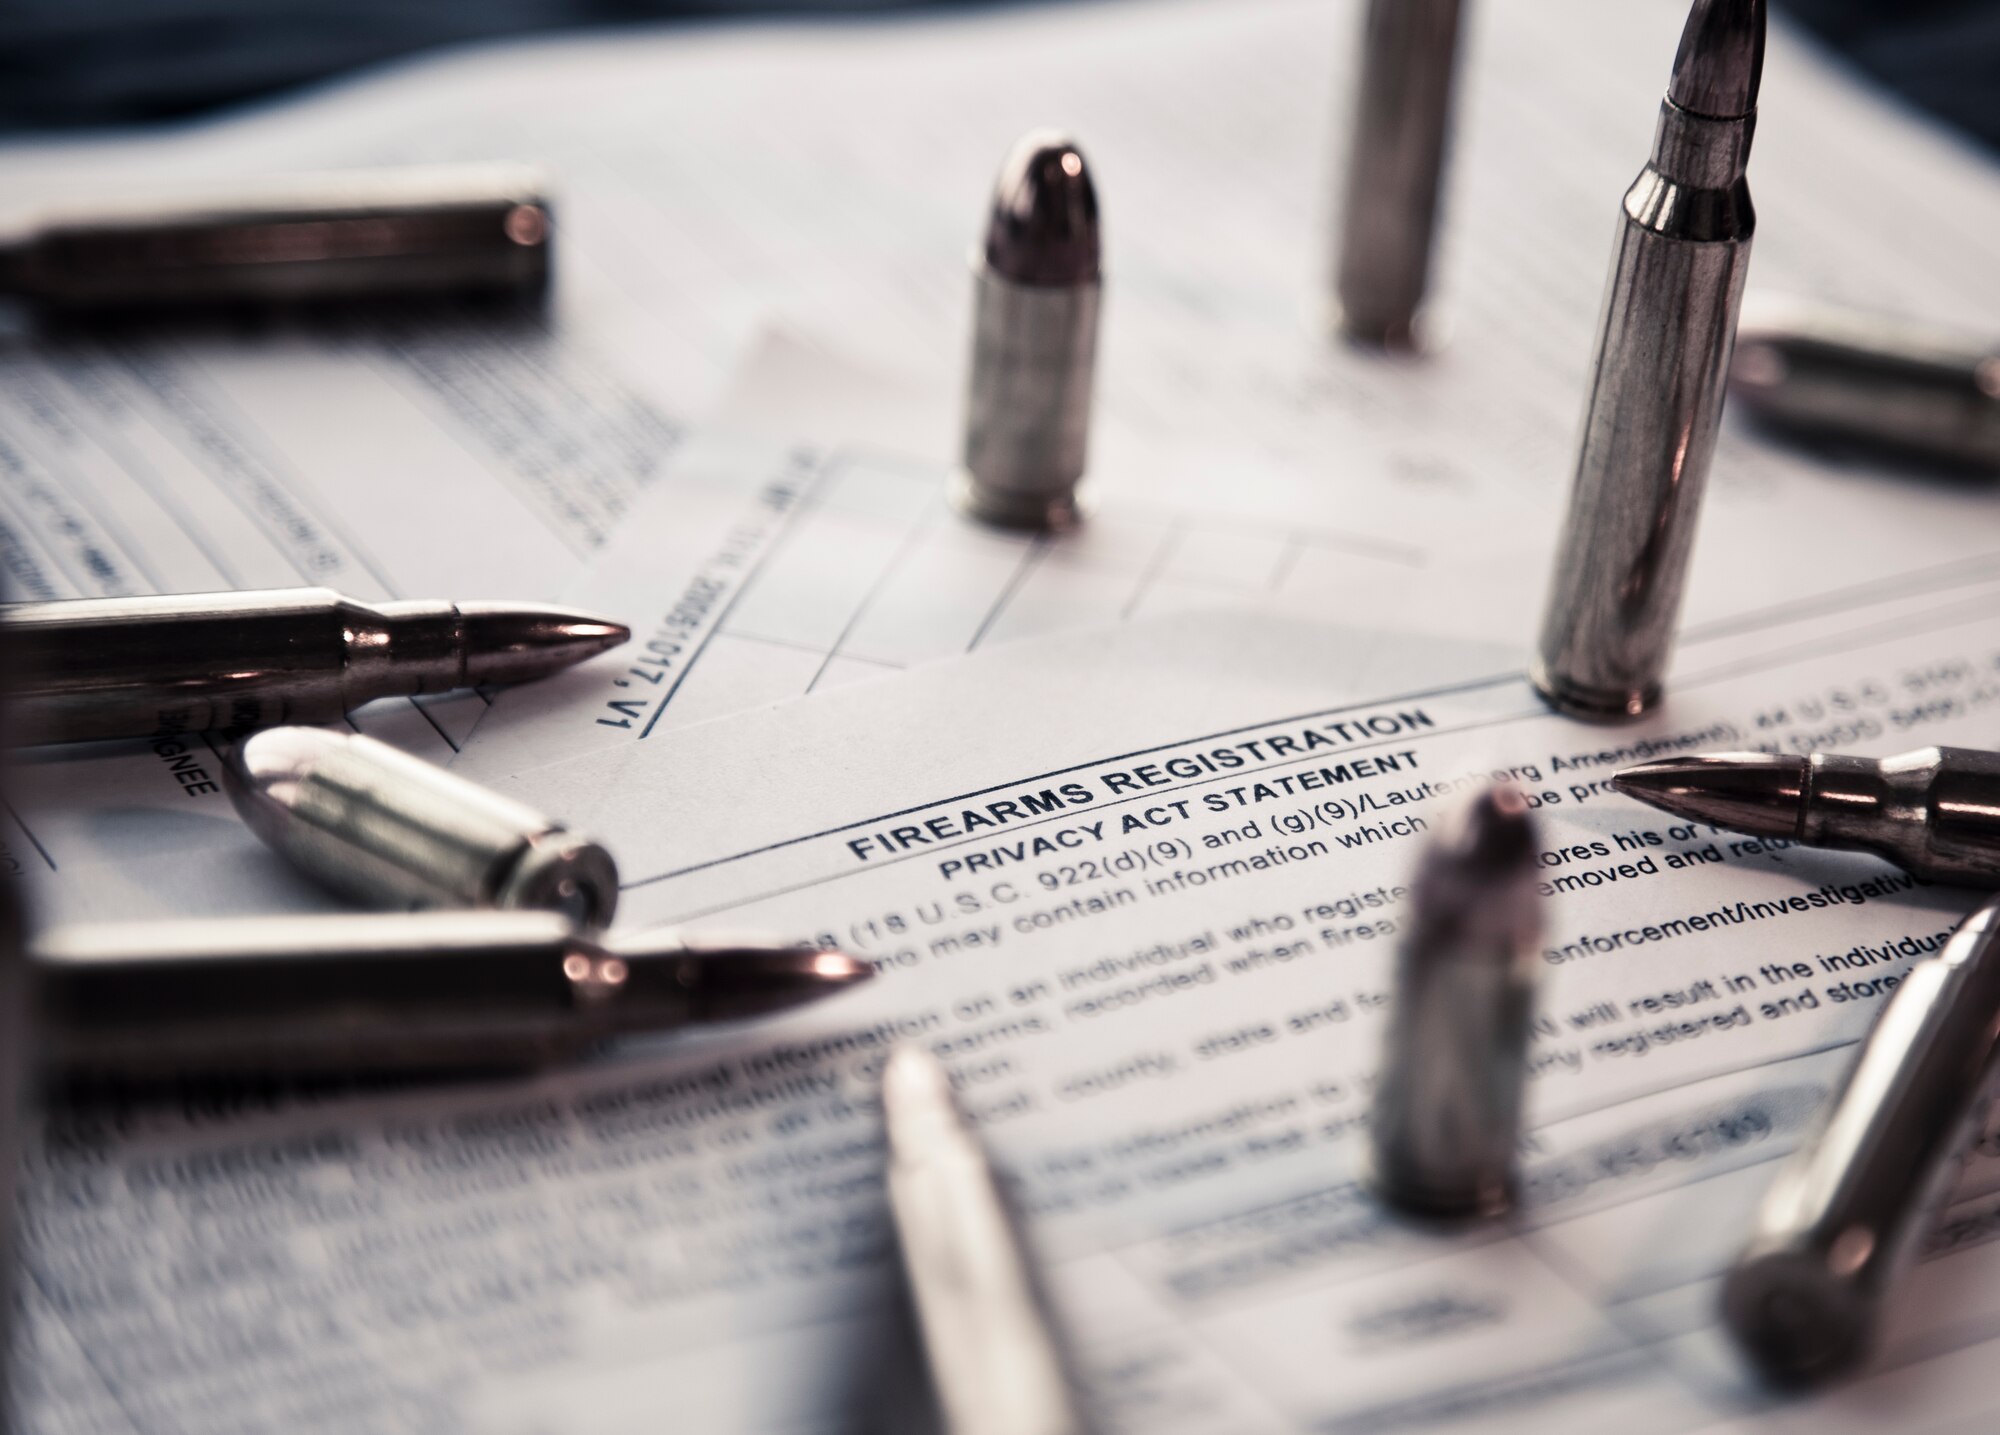 Nine millimeter and 5.56 cartridges sit on top of an AF Form 1314 Firearms Registration form and a DD Form 2760 Qualification to Possess Firearms or Ammunitions form at Minot Air Force Base, N.D., July 10, 2015. According to Staff Sgt. Justin McCoy, 5th Security Forces Squadron assistant NCO in charge of armory operations, if you reside in base housing, you are authorized by the installation commander to keep your personally owned weapons in your home, provided you register them with the 5th SFS Armory. (U.S. Air Force photo/Airman 1st Class Justin T. Armstrong)